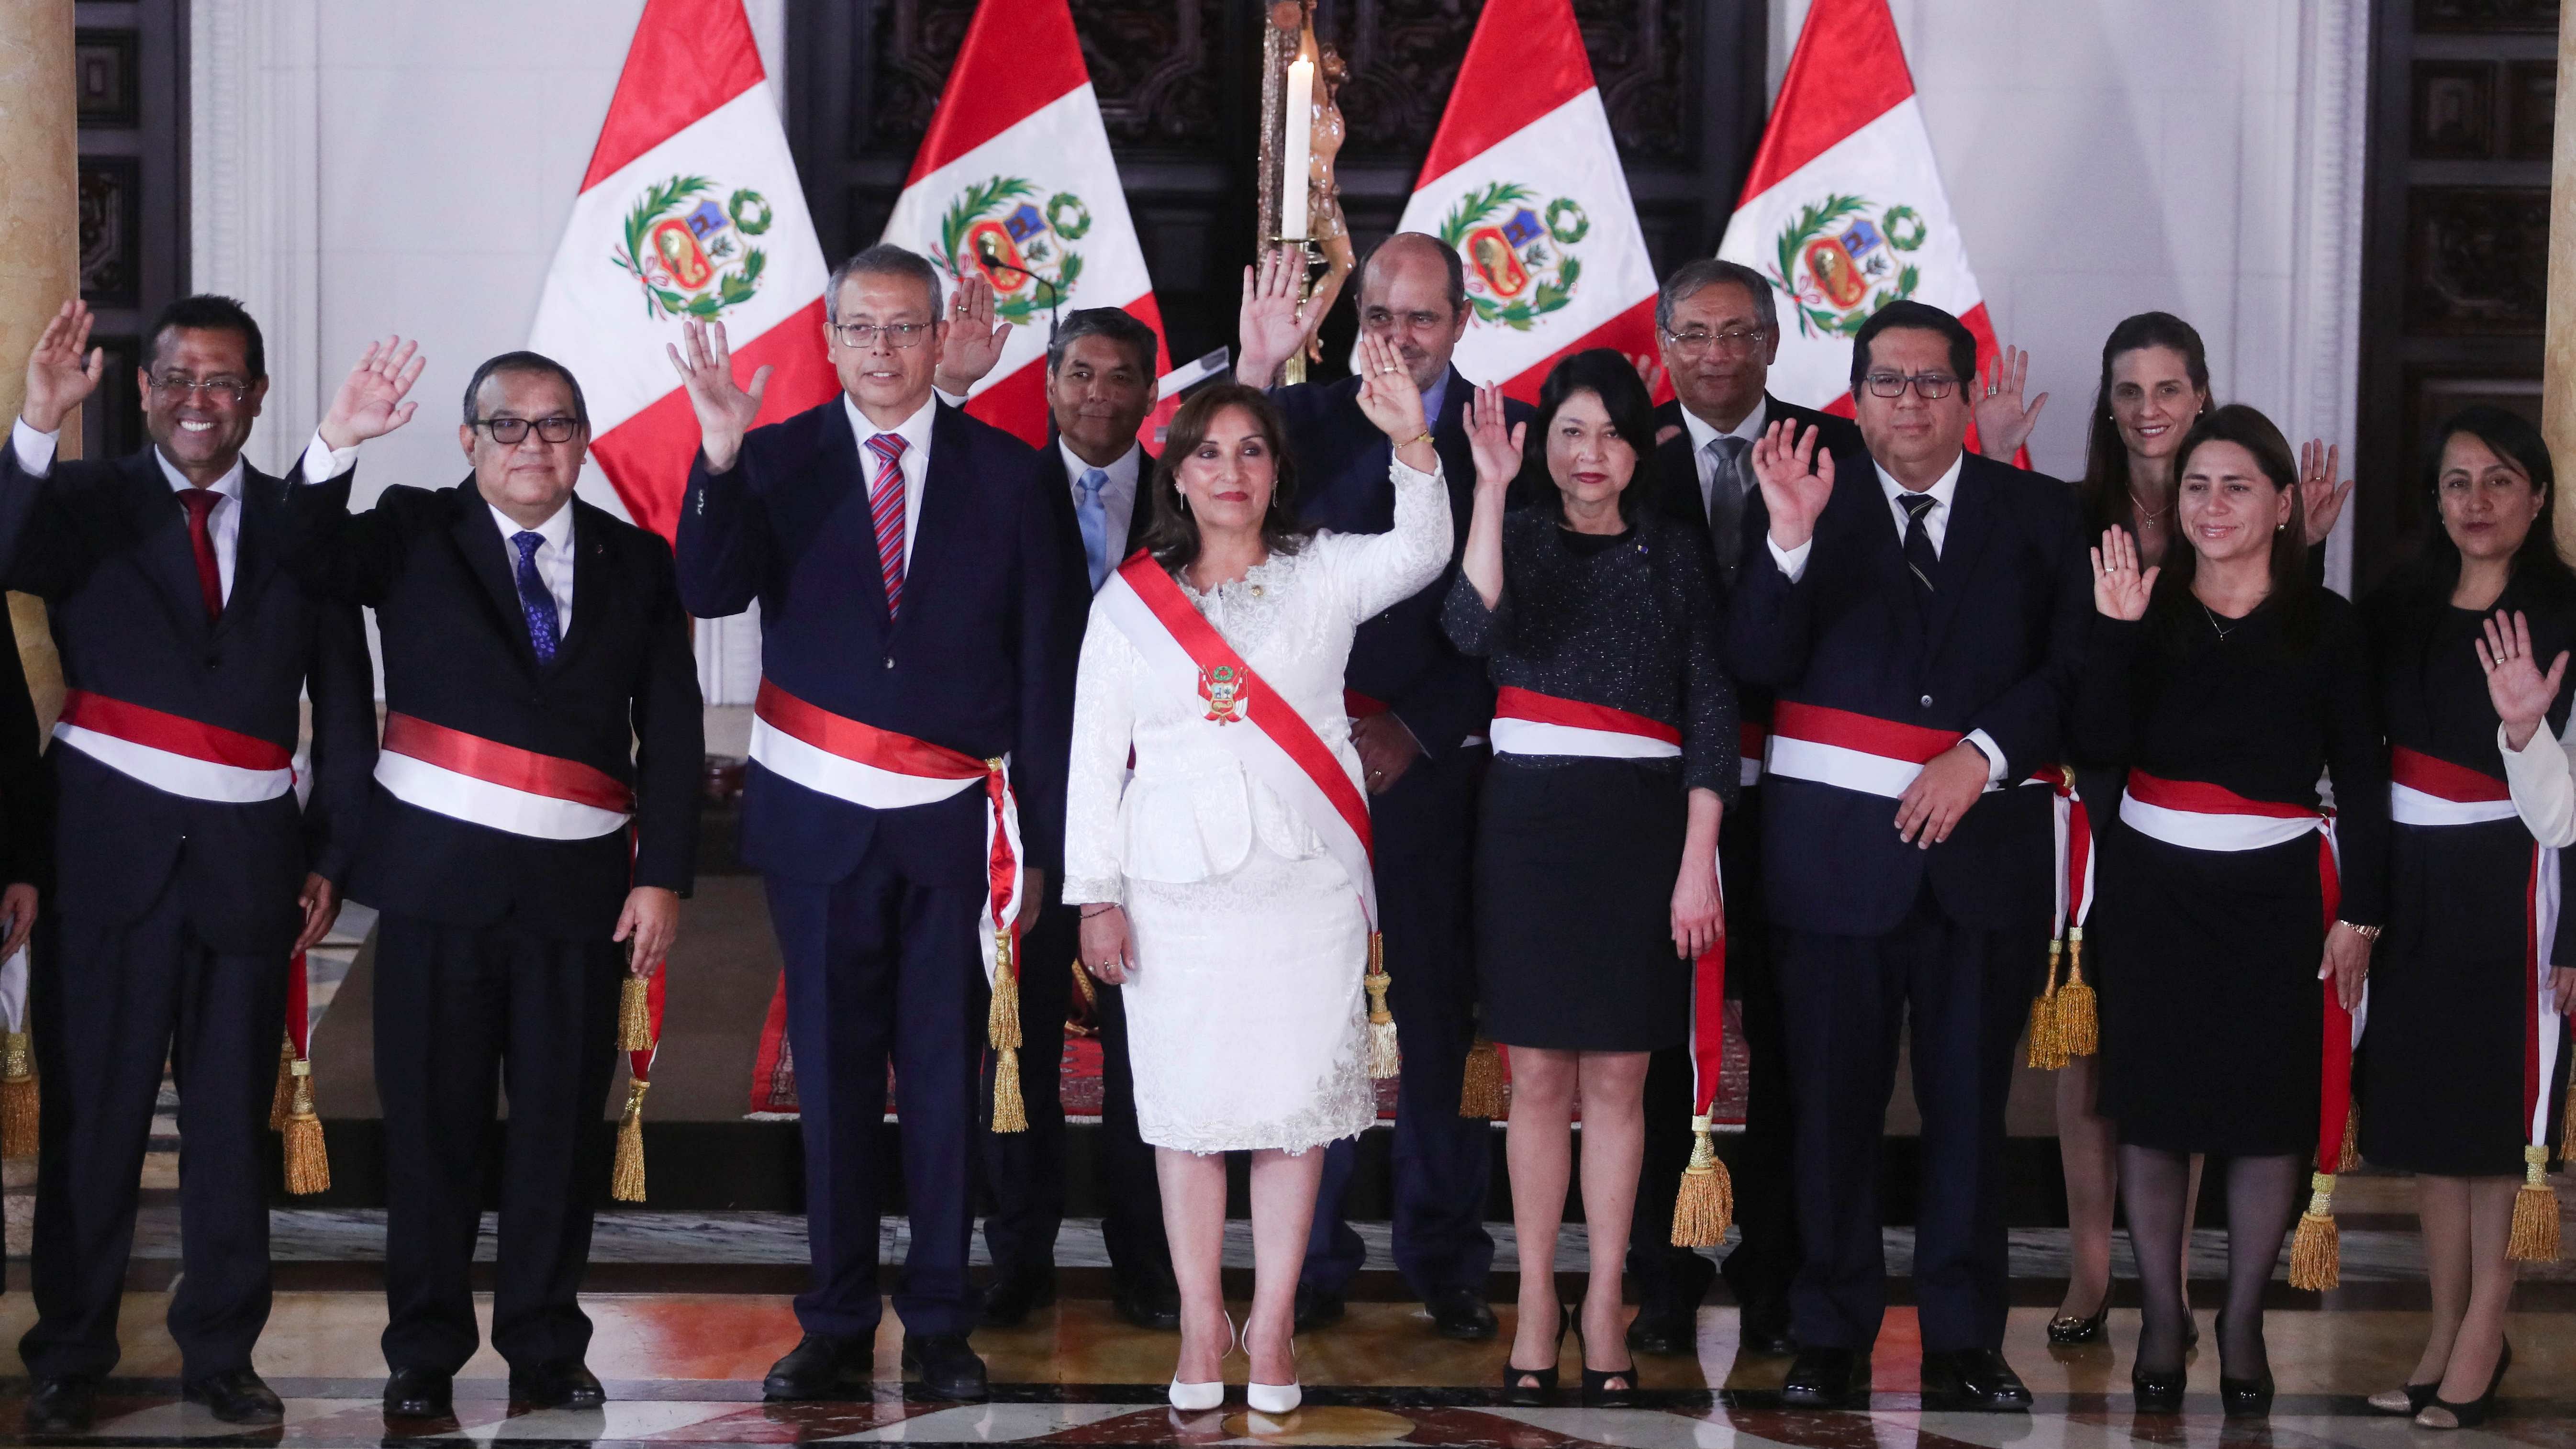 Peru's President Dina Boluarte, who took office after her predecessor Pedro Castillo was ousted, poses for a family photo along with members of her Cabinet in Lima. Credit: Reuters Photo